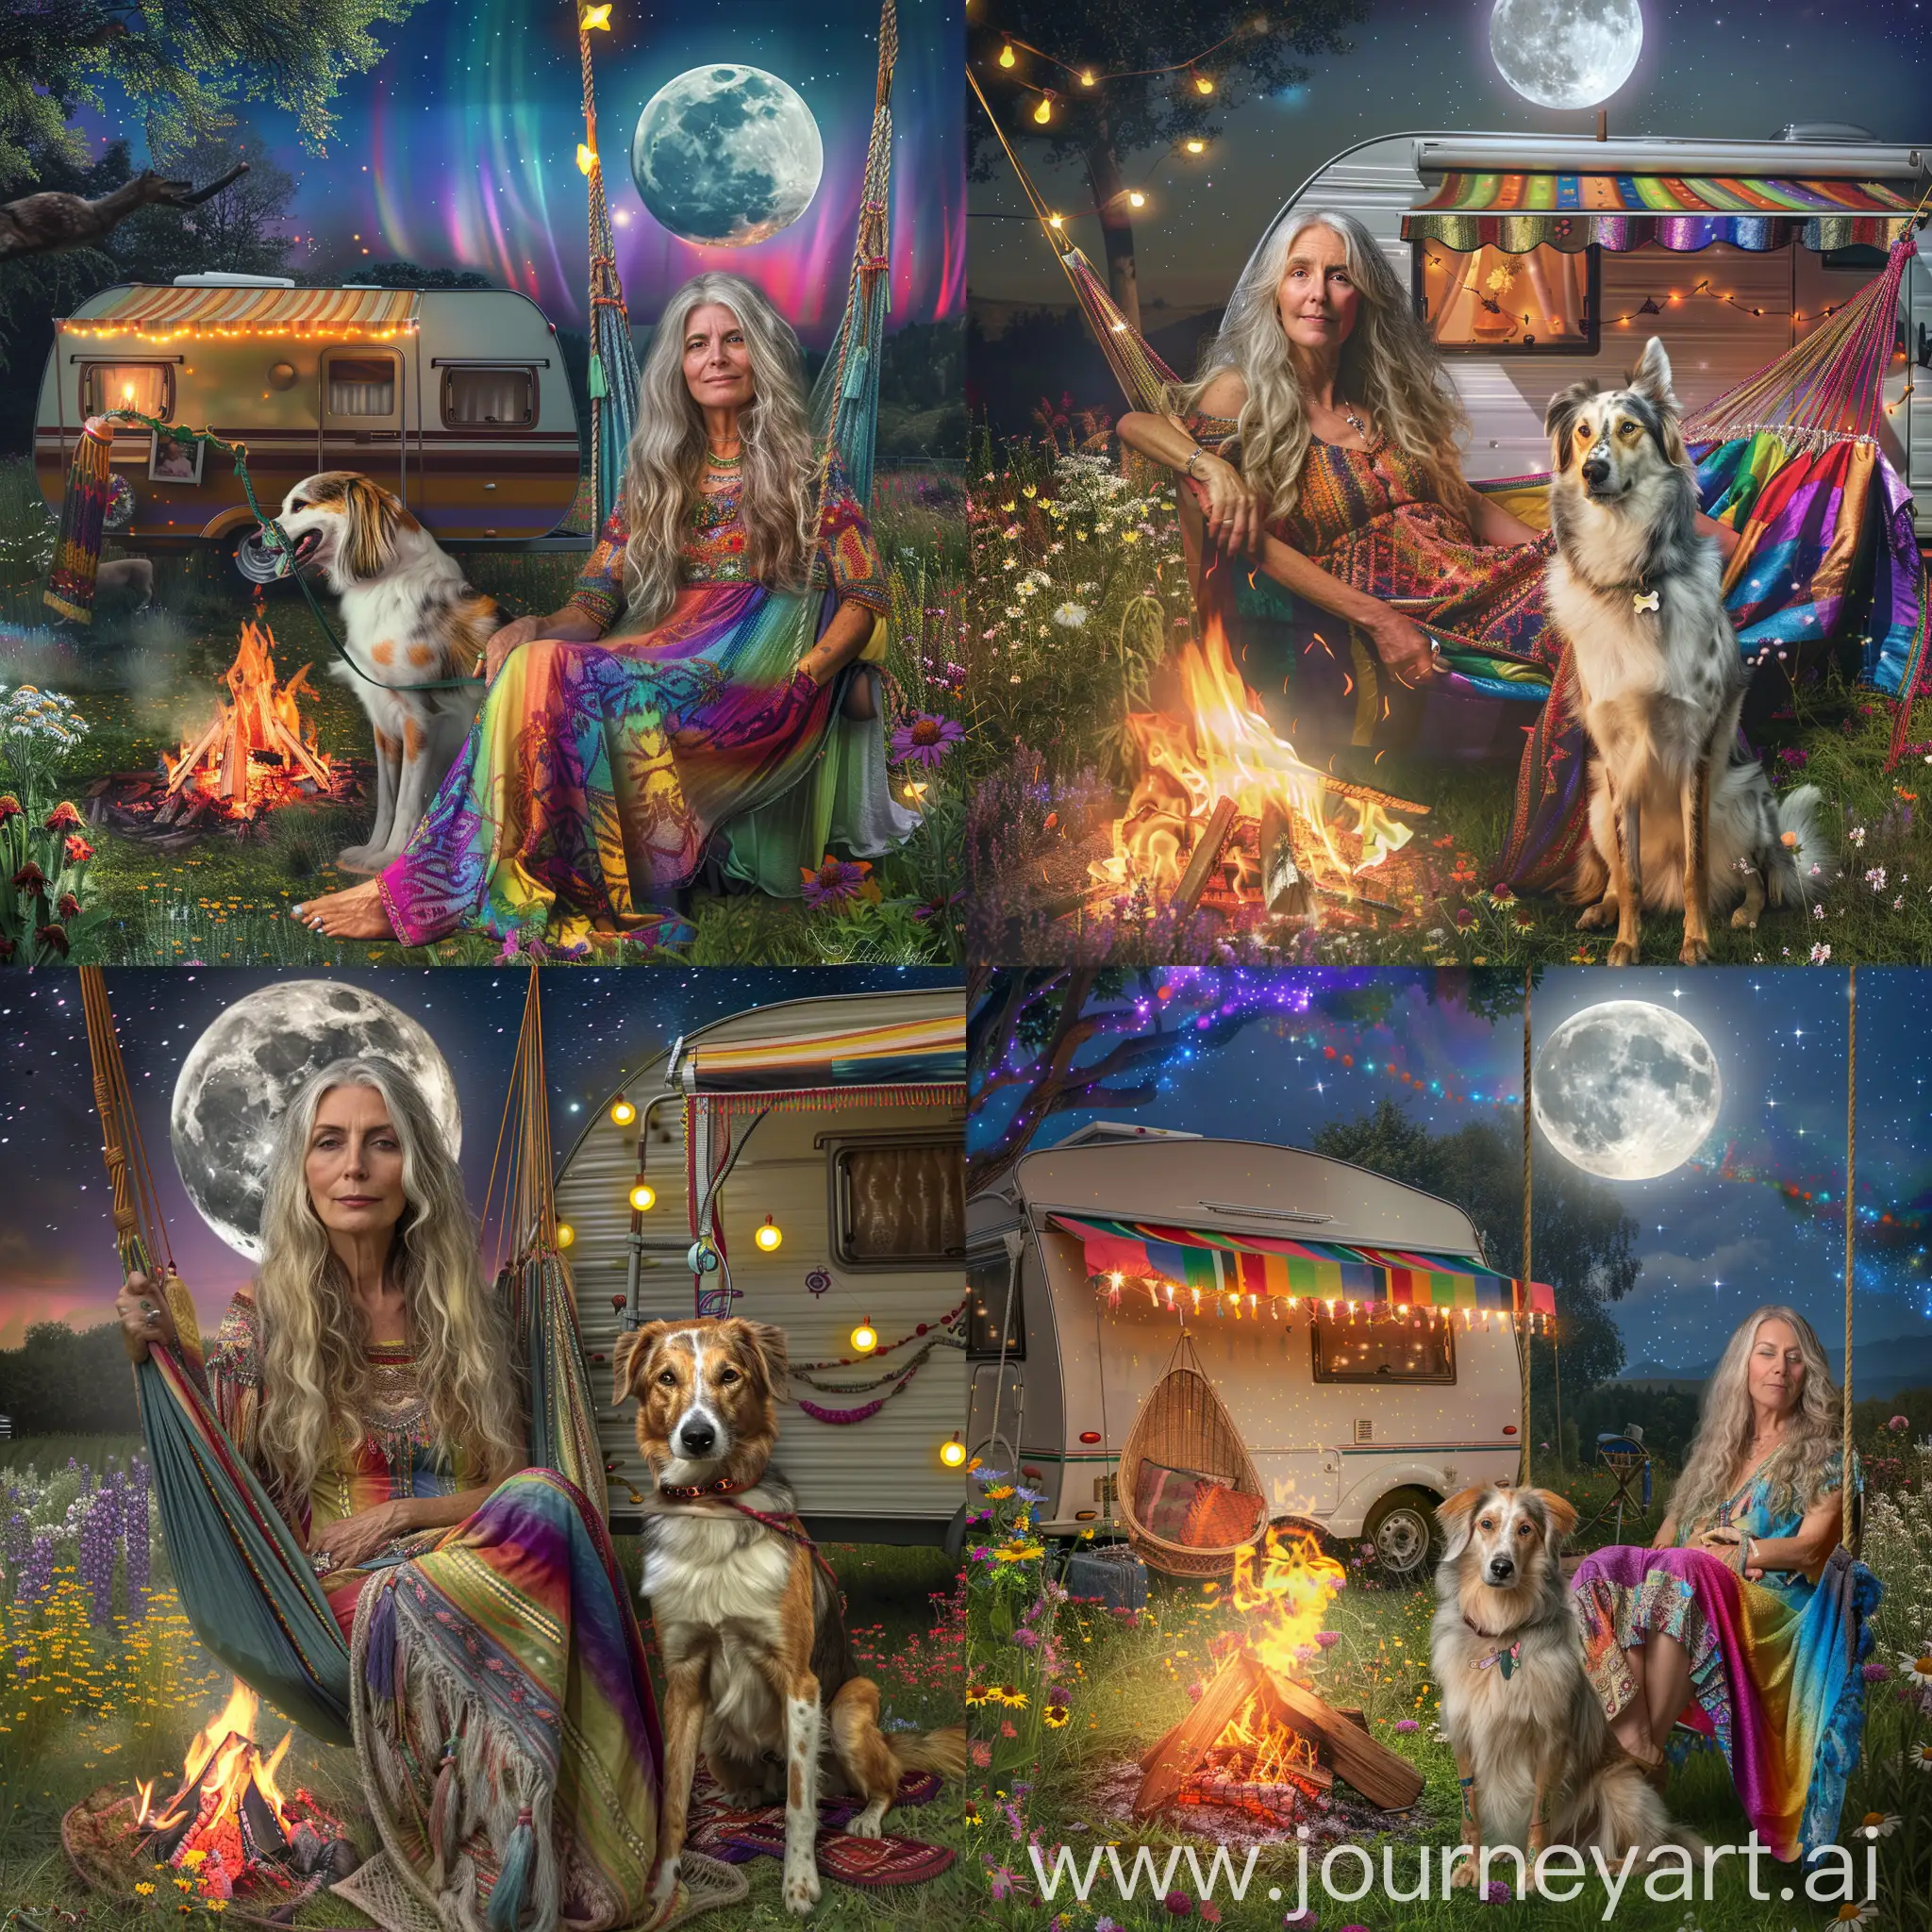 A beautiful evening, a bright full moon in the sky and stars.  A woman in her late fifties sits in front of a camp fire on a swinging hammock chair, as a facial, full frontal image of her. Her blonde long hair mixed with grey hair gently curls around her shoulders. Wearing a long flowing dress in rainbow shades. Her Borzoi stands next to her with markings in white and amber fur. Behind her is her wildflower meadow glowing under the moonlight. Her caravan with it's Bohemian colurs and decoration stands with it's Bohemian awning and lights.